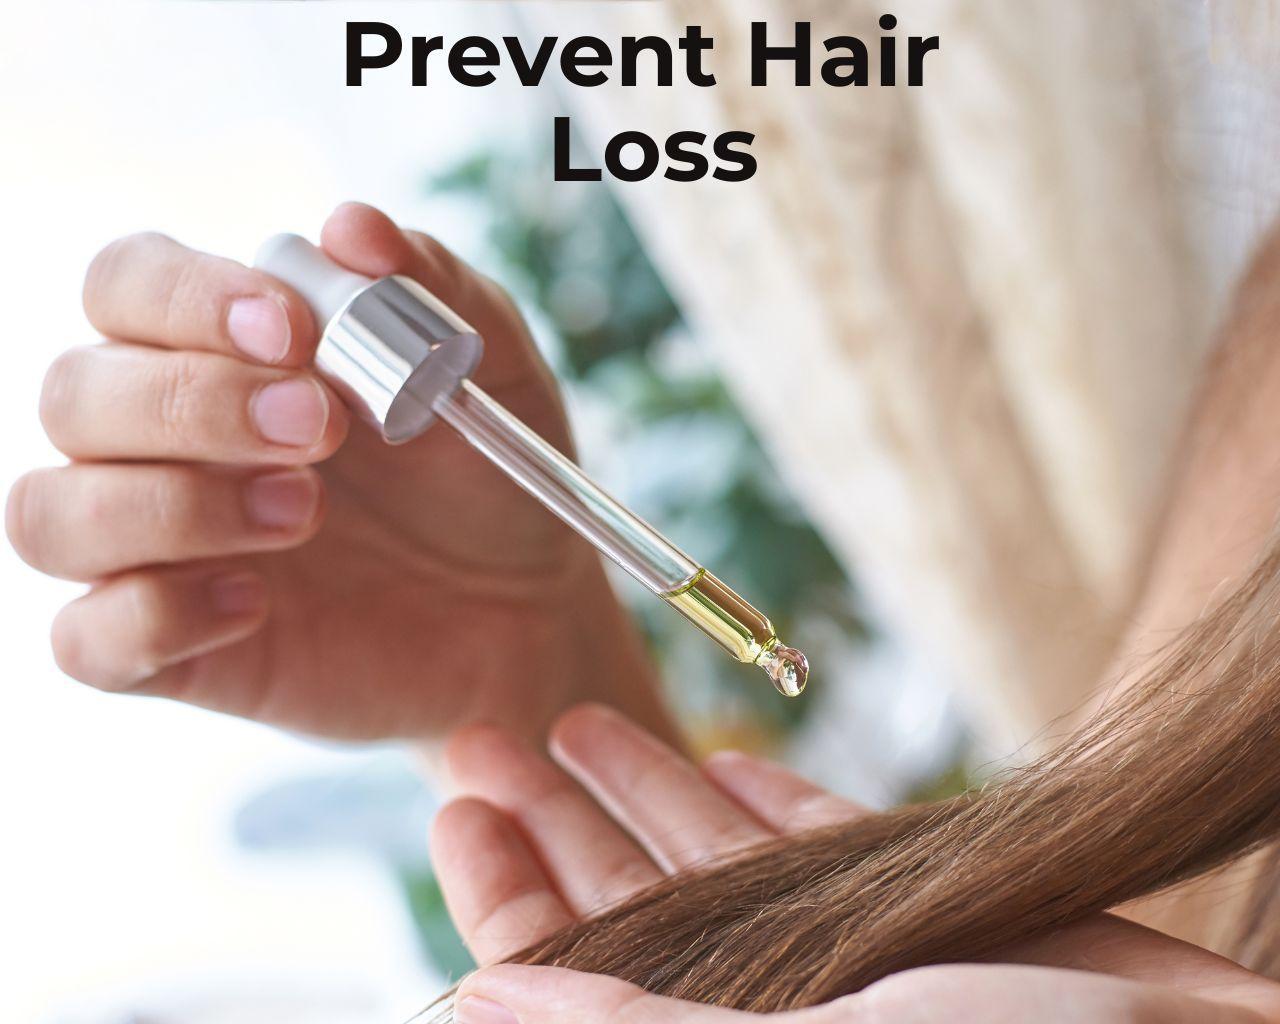 What Are the Best Home Remedies for Hair fall? The Causes and Effective Prevention Tips!